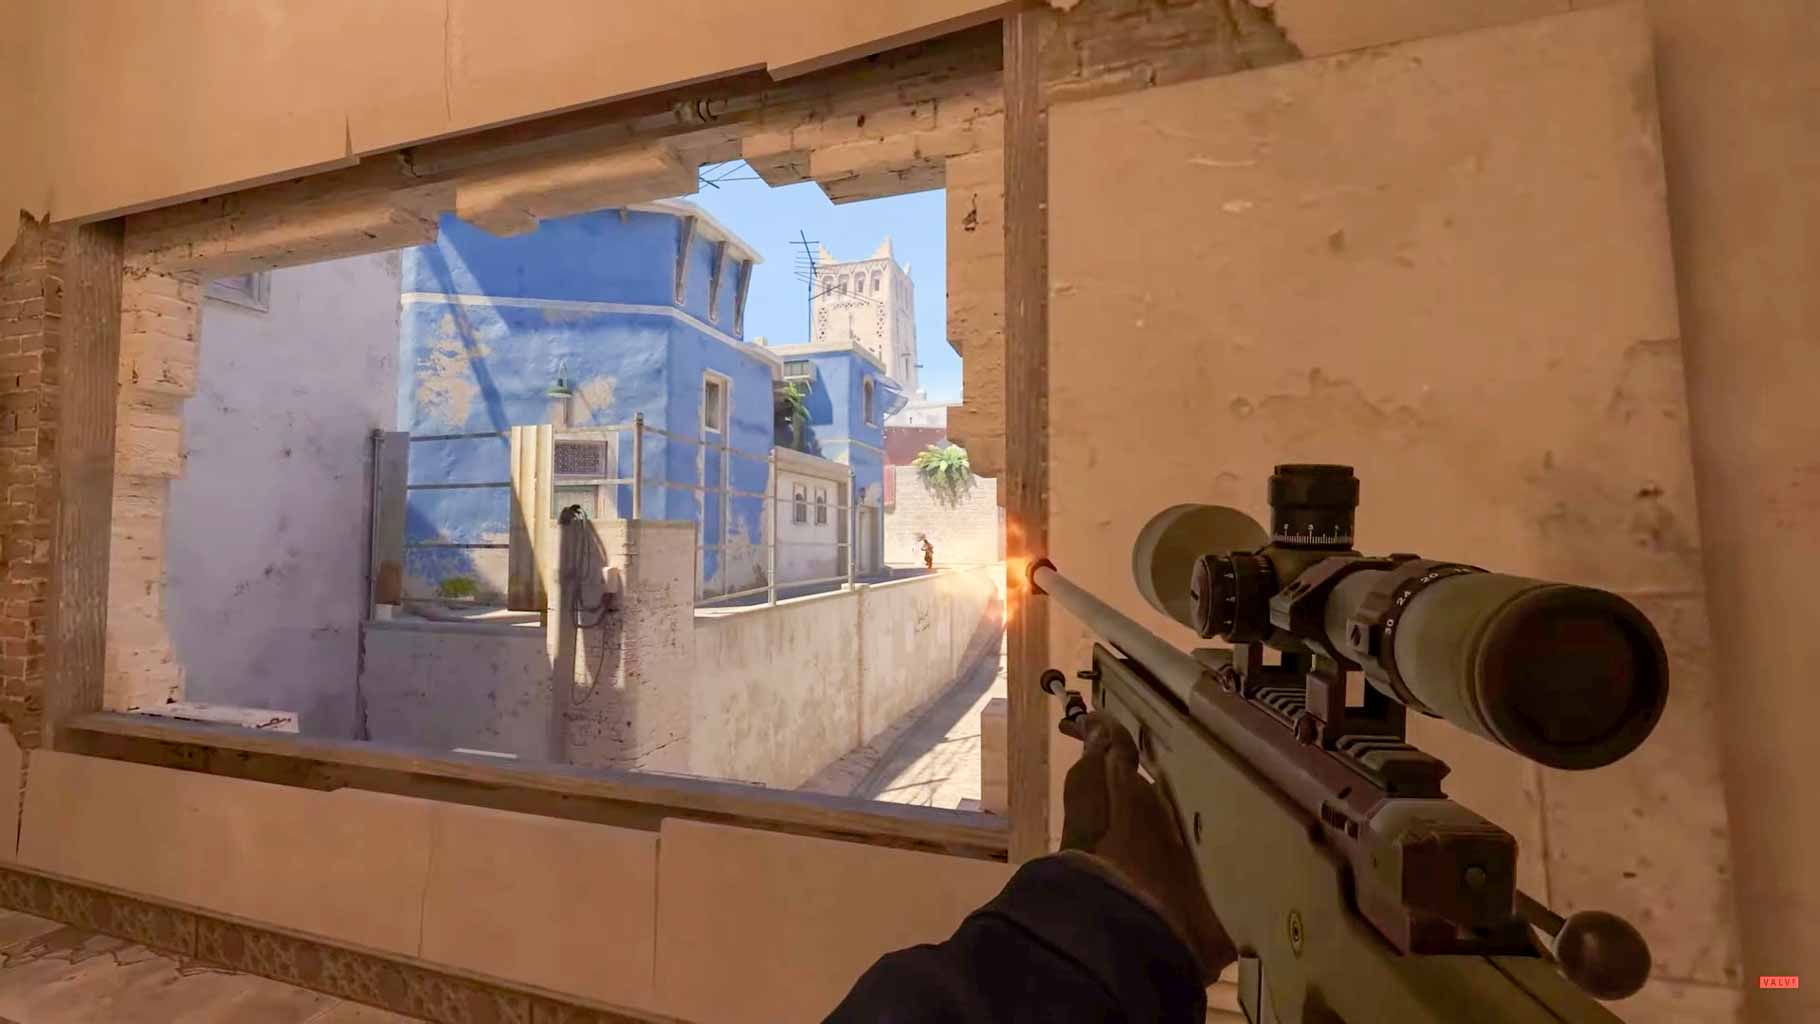 Intense Counter Strike 2 gameplay with player engaging in action.